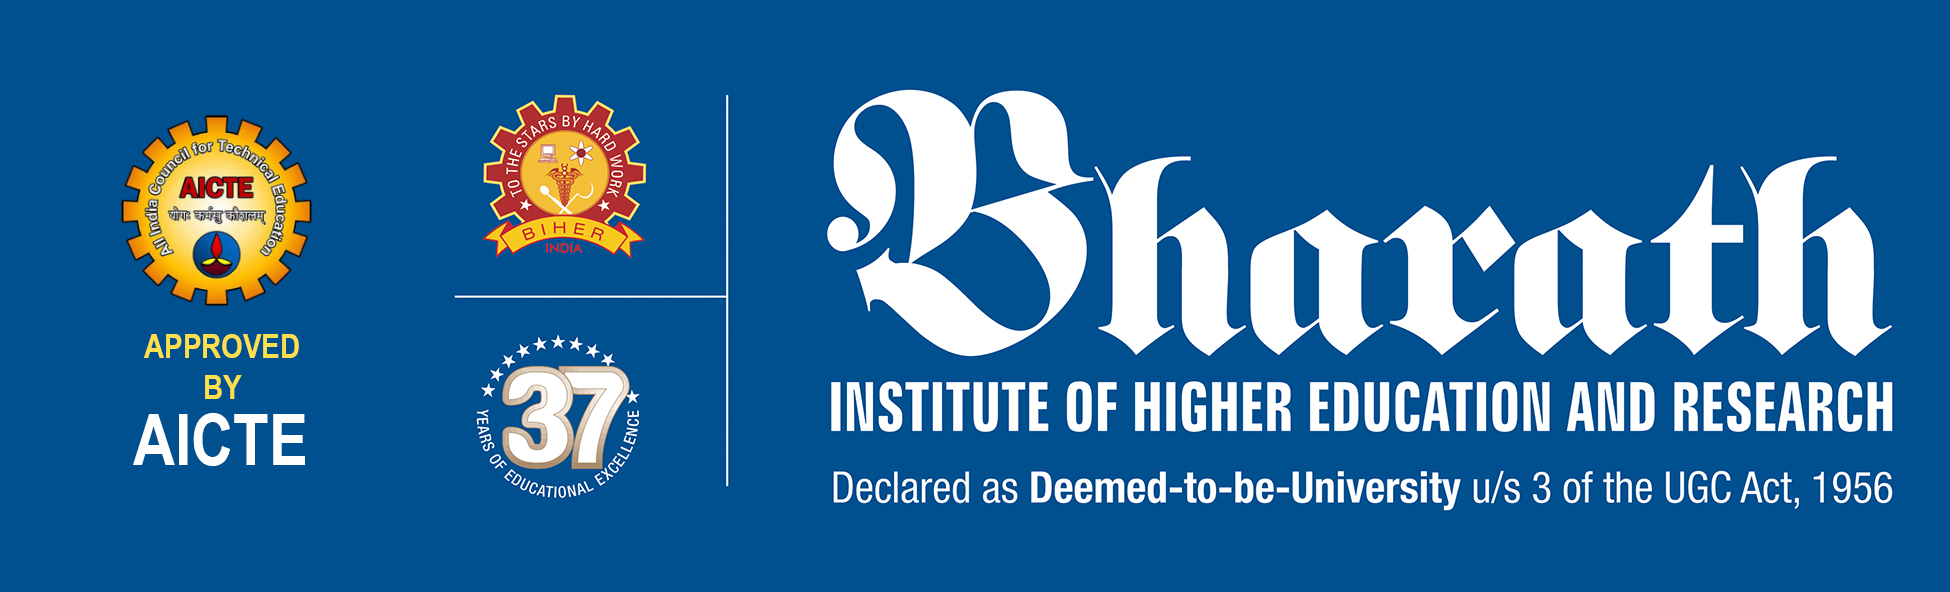 BIHER - Bharath Institute of Higher Education and Research